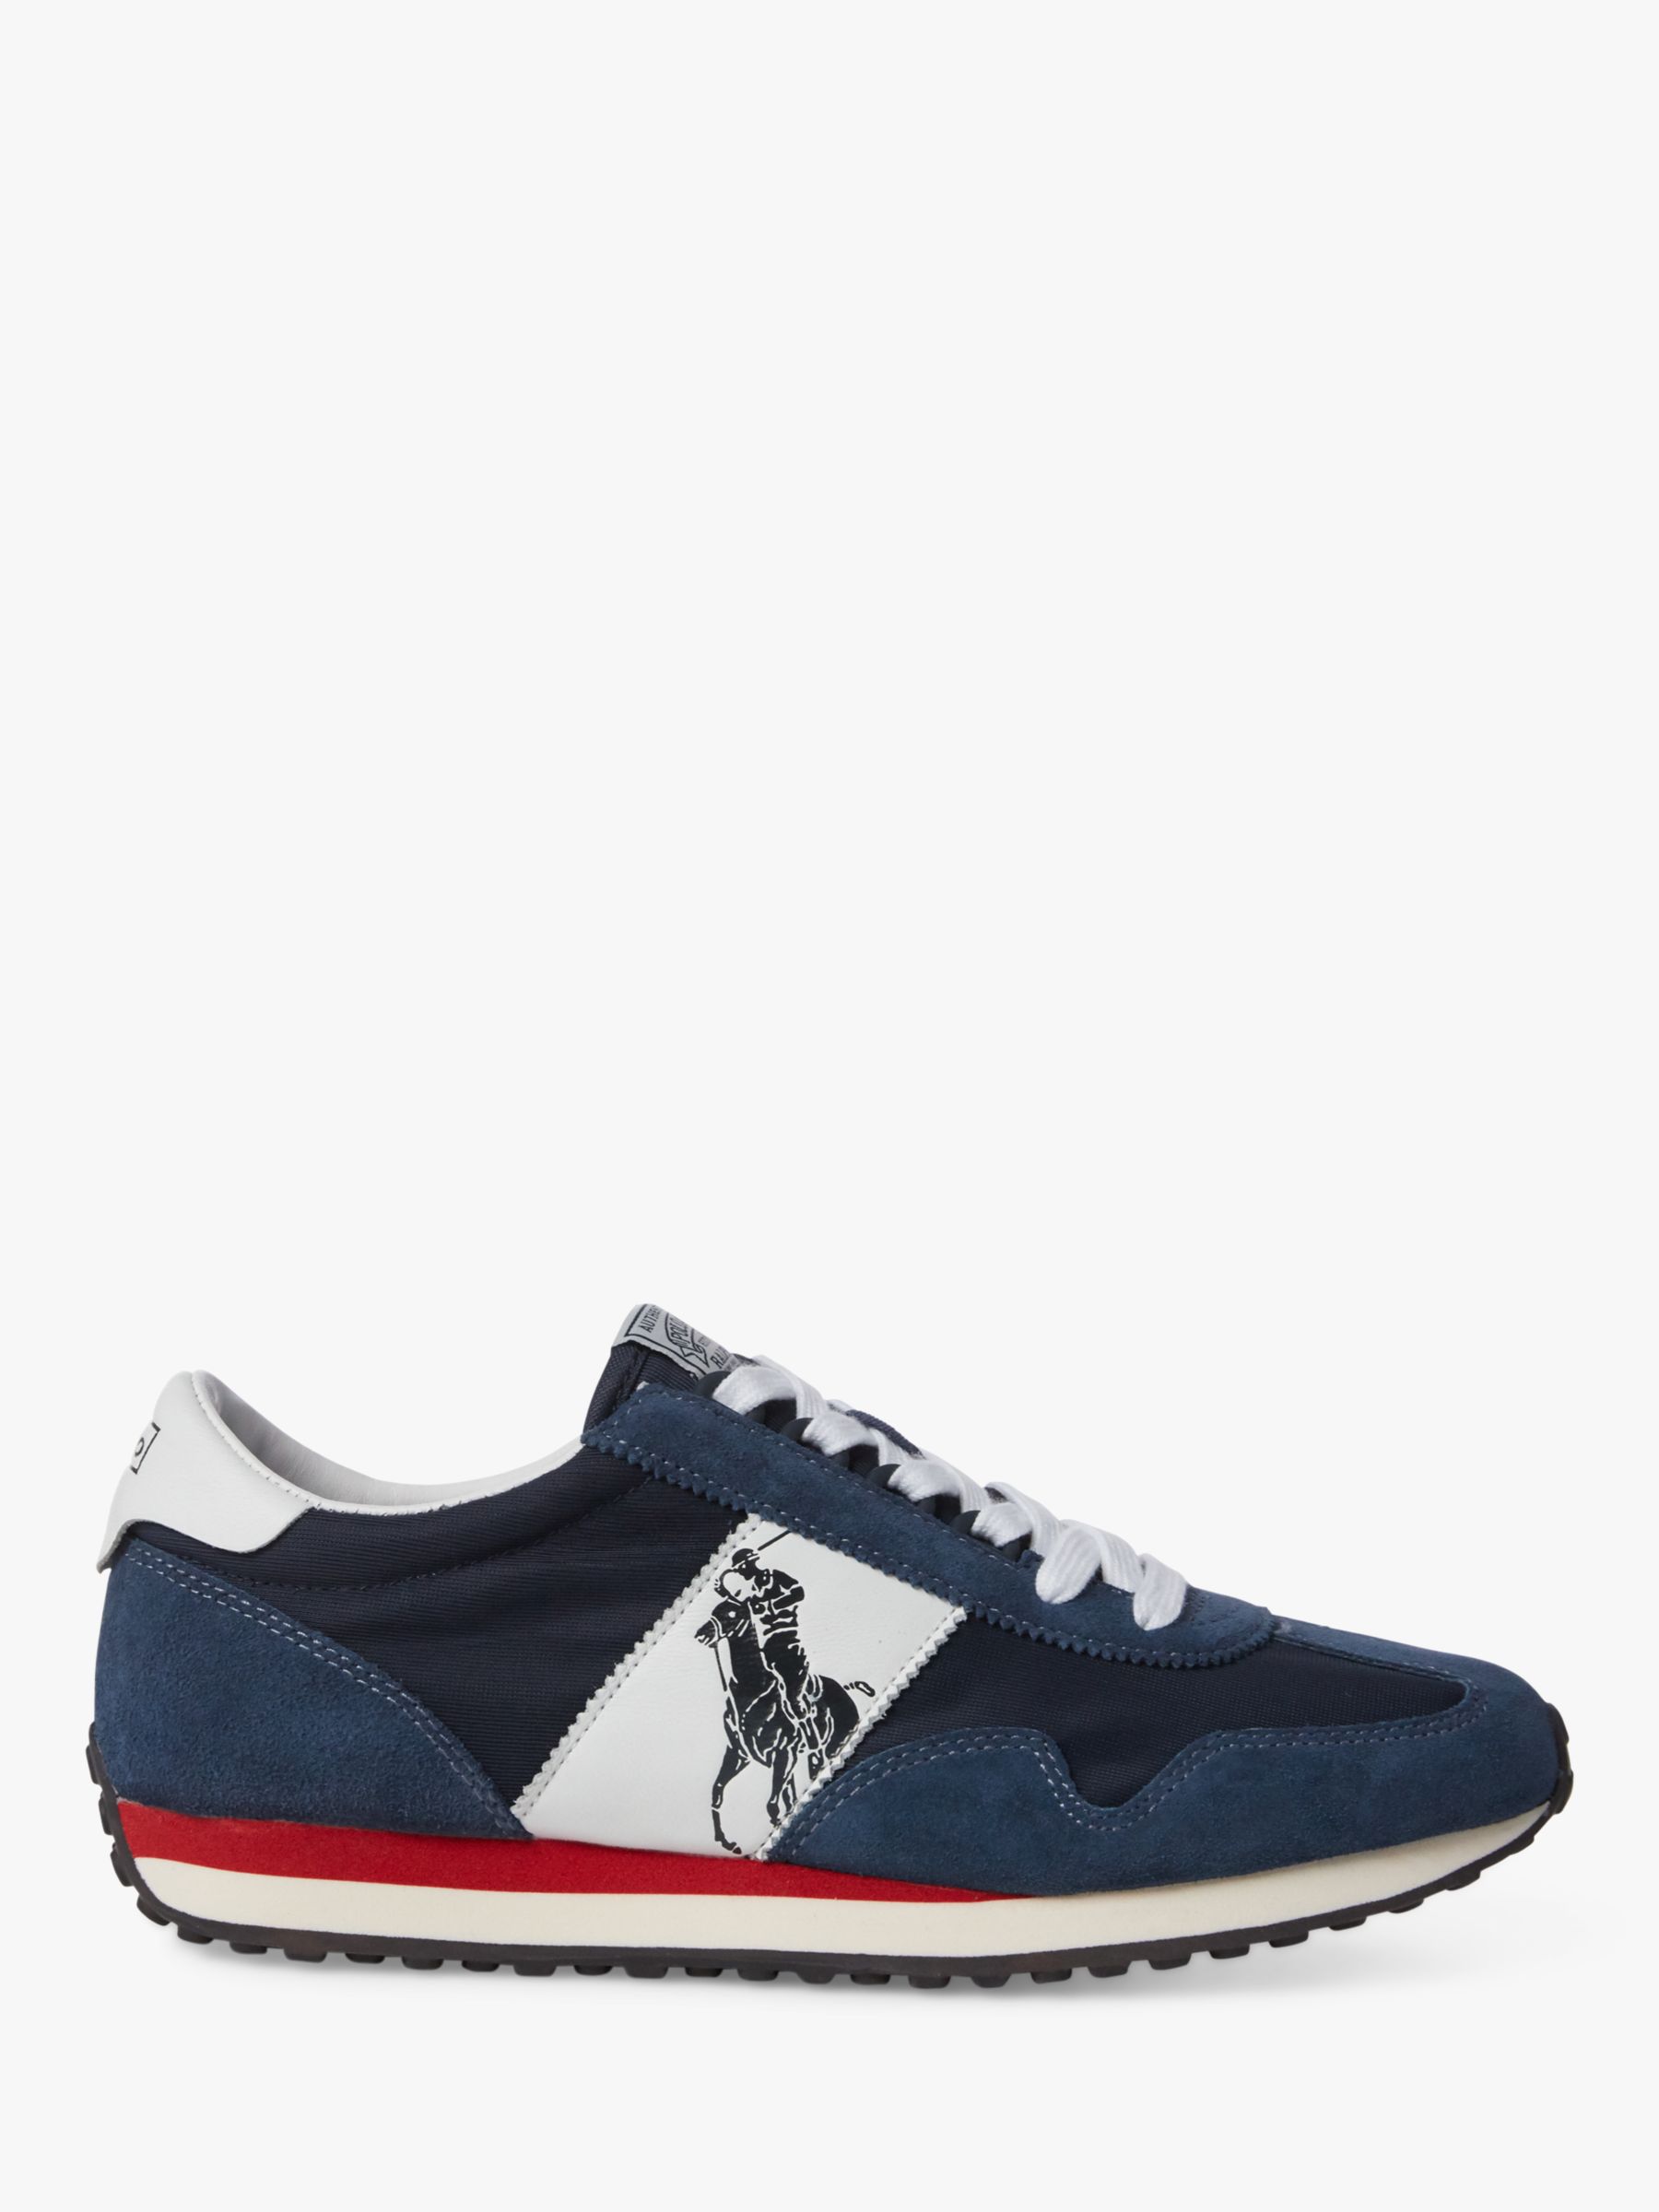 Polo Ralph Lauren Train 90 Trainers at John Lewis & Partners